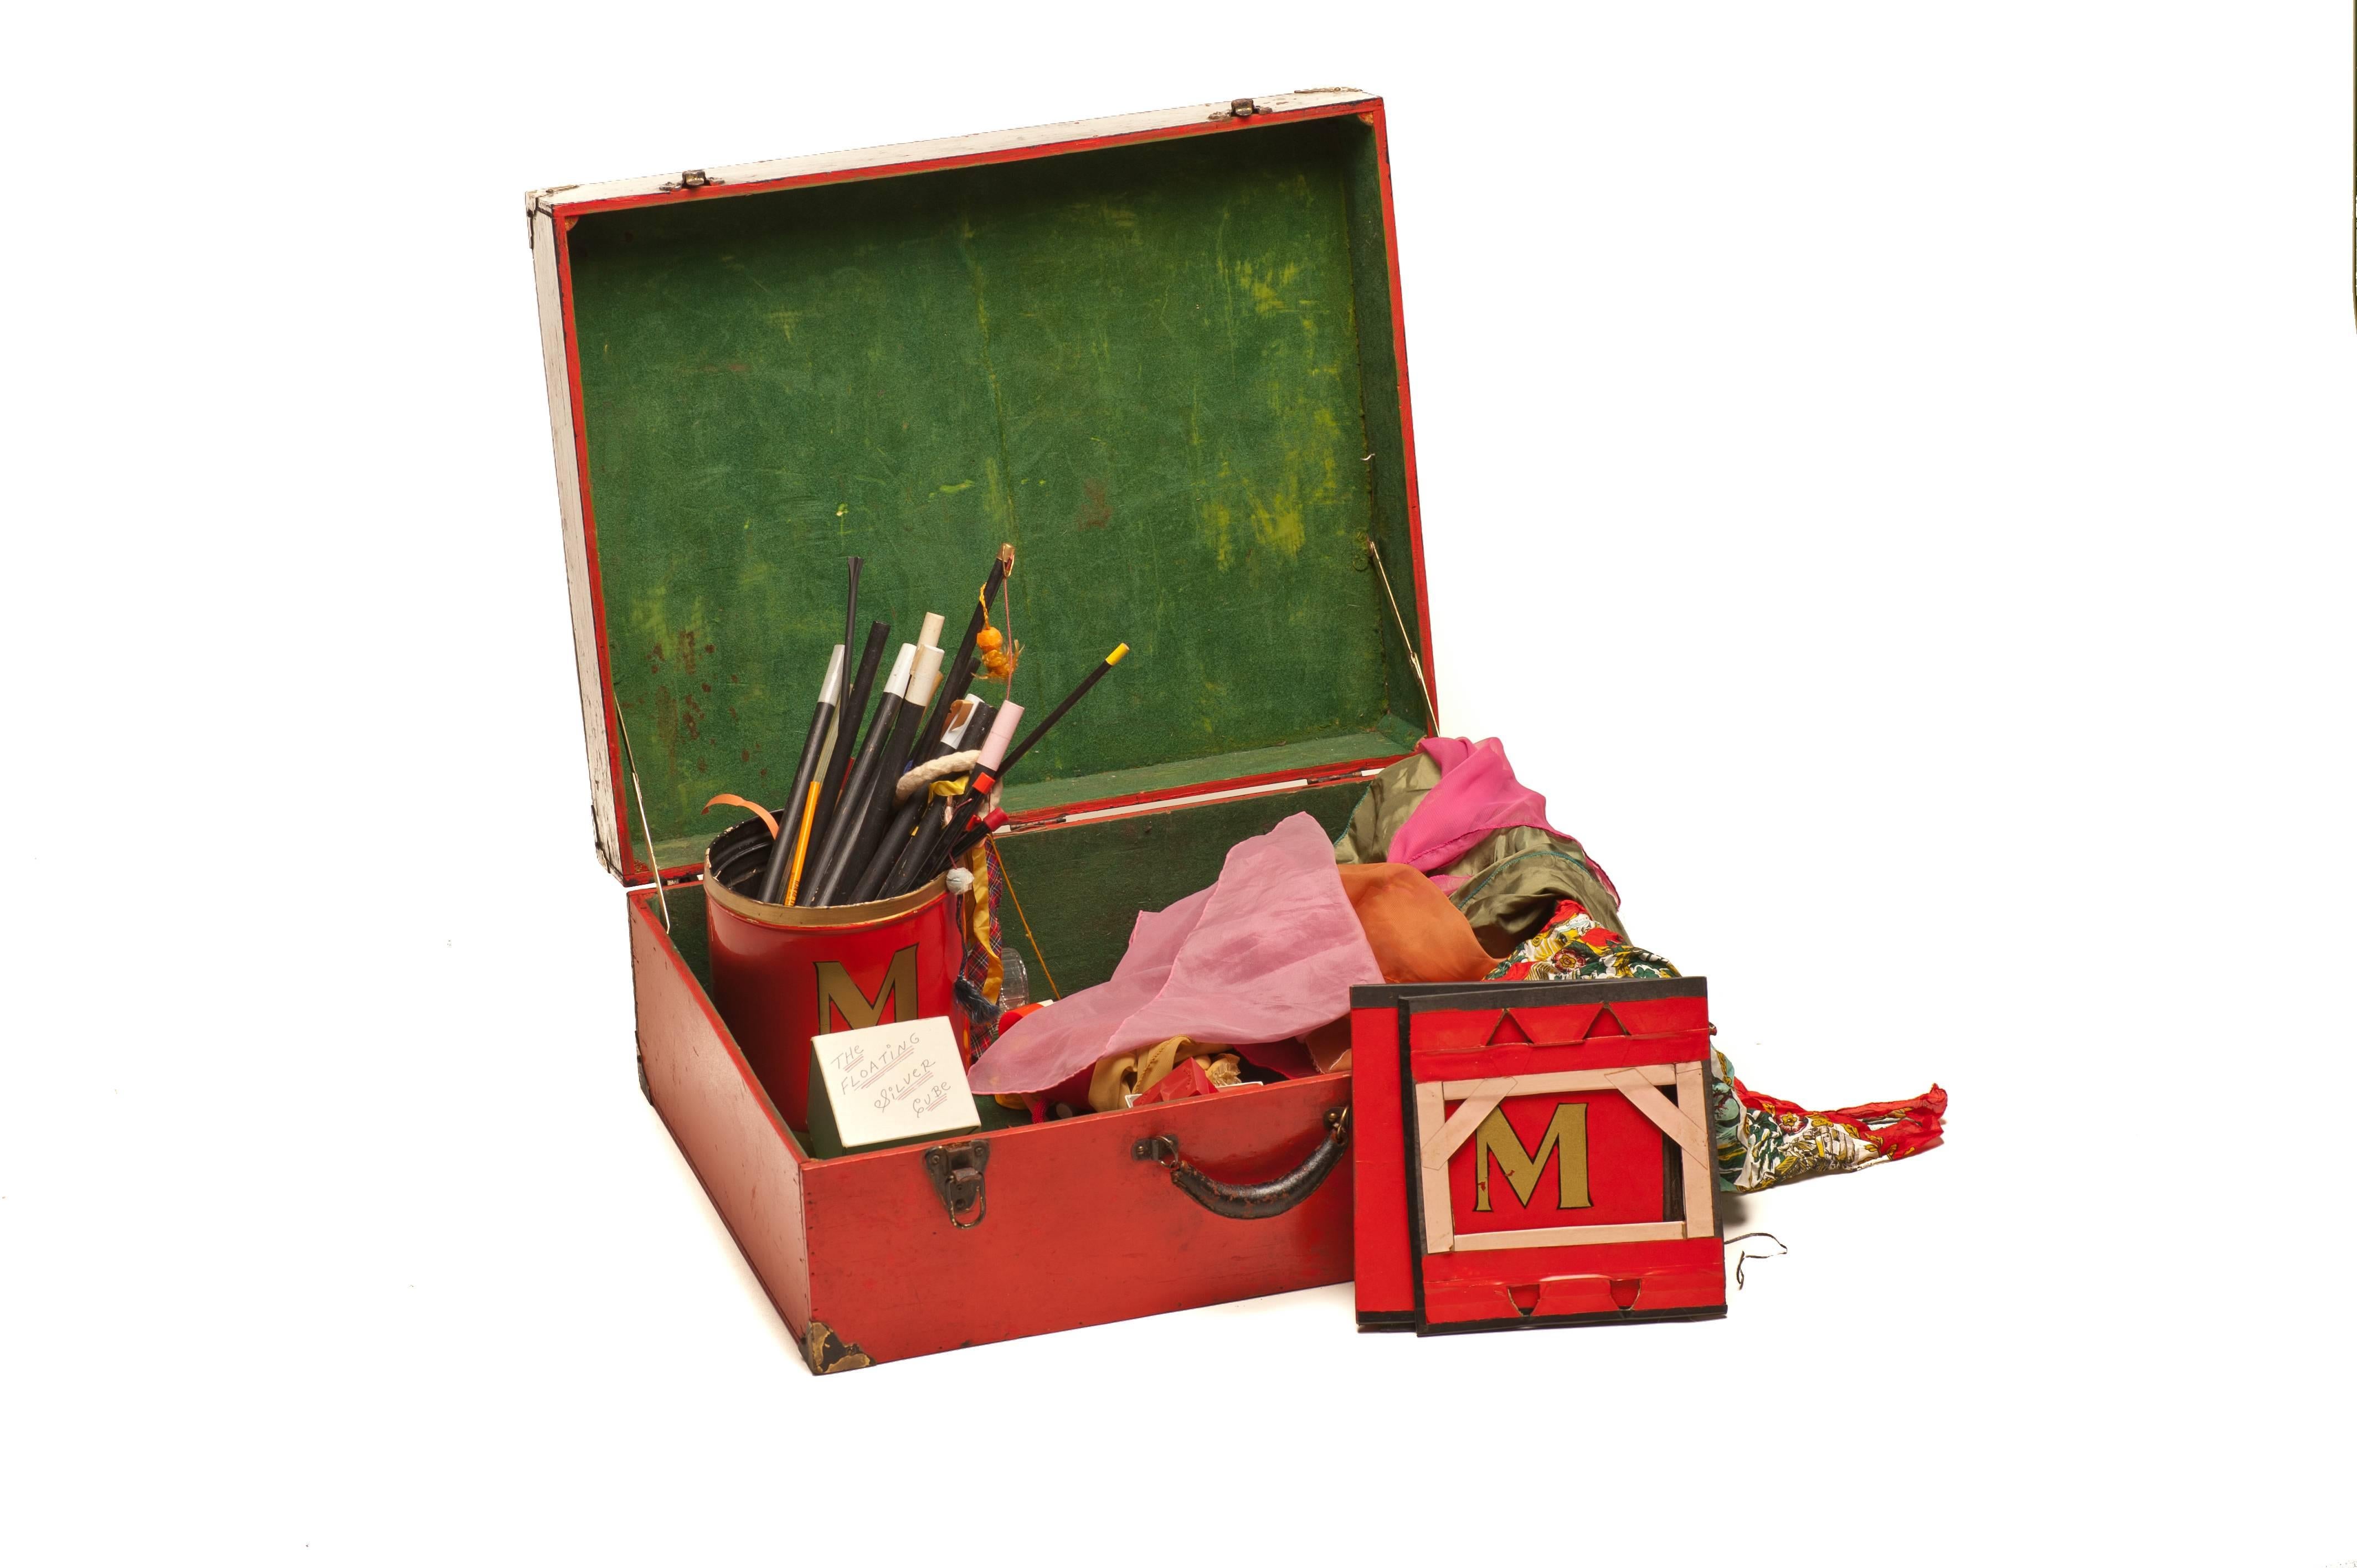 Rare vintage magicians box or case full of trick props. Great images on the front. A nice Folk Art piece or magic collectible. These are hard to find.